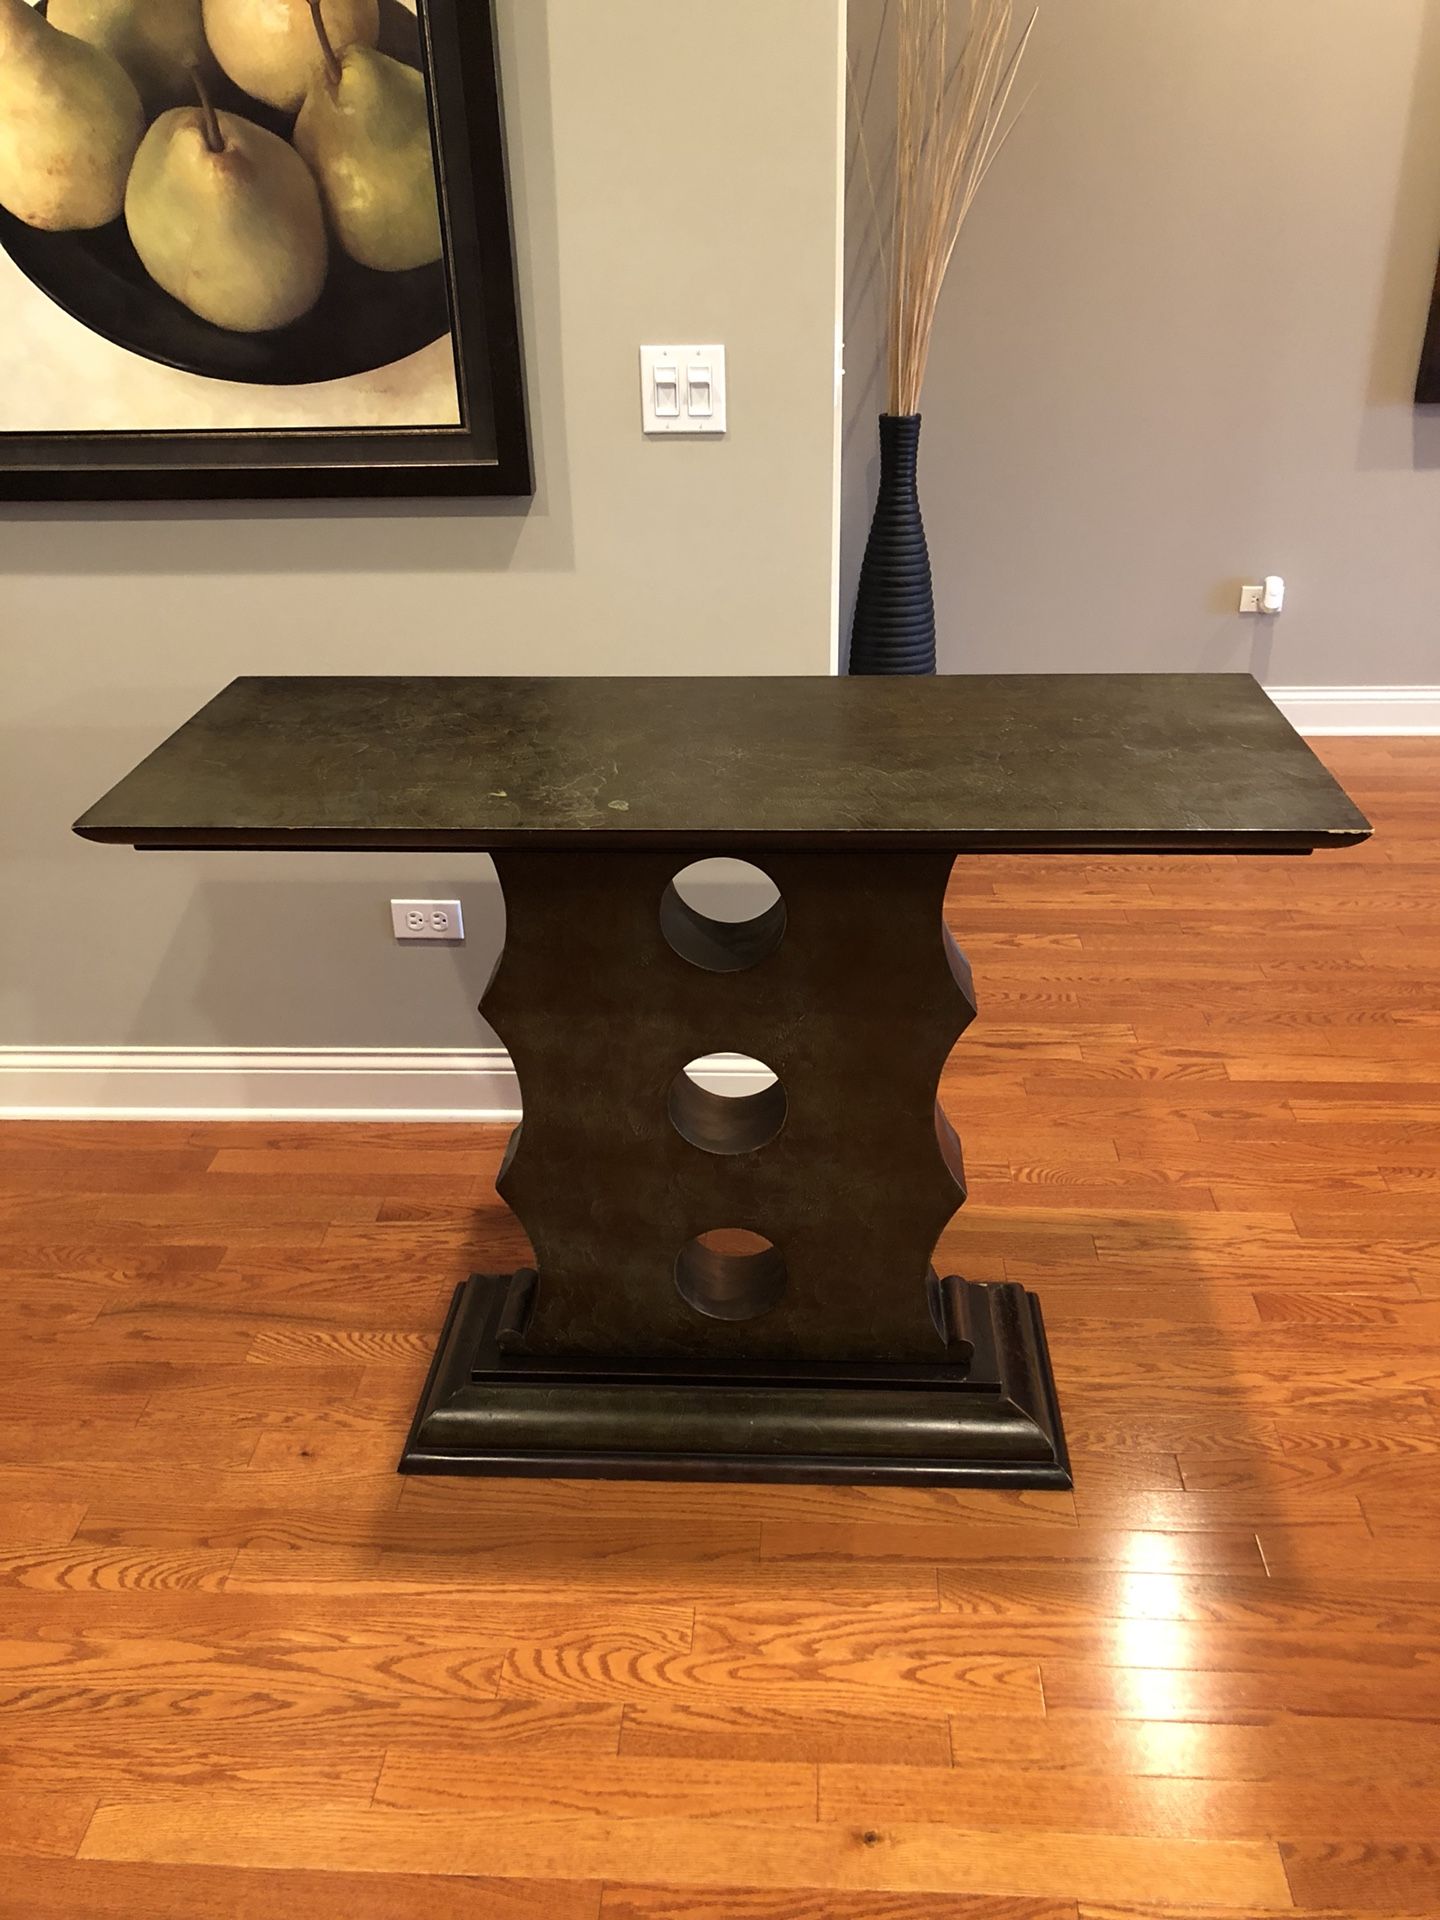 Console / accent table (Cassona furniture): 36 high x 19.5 deep